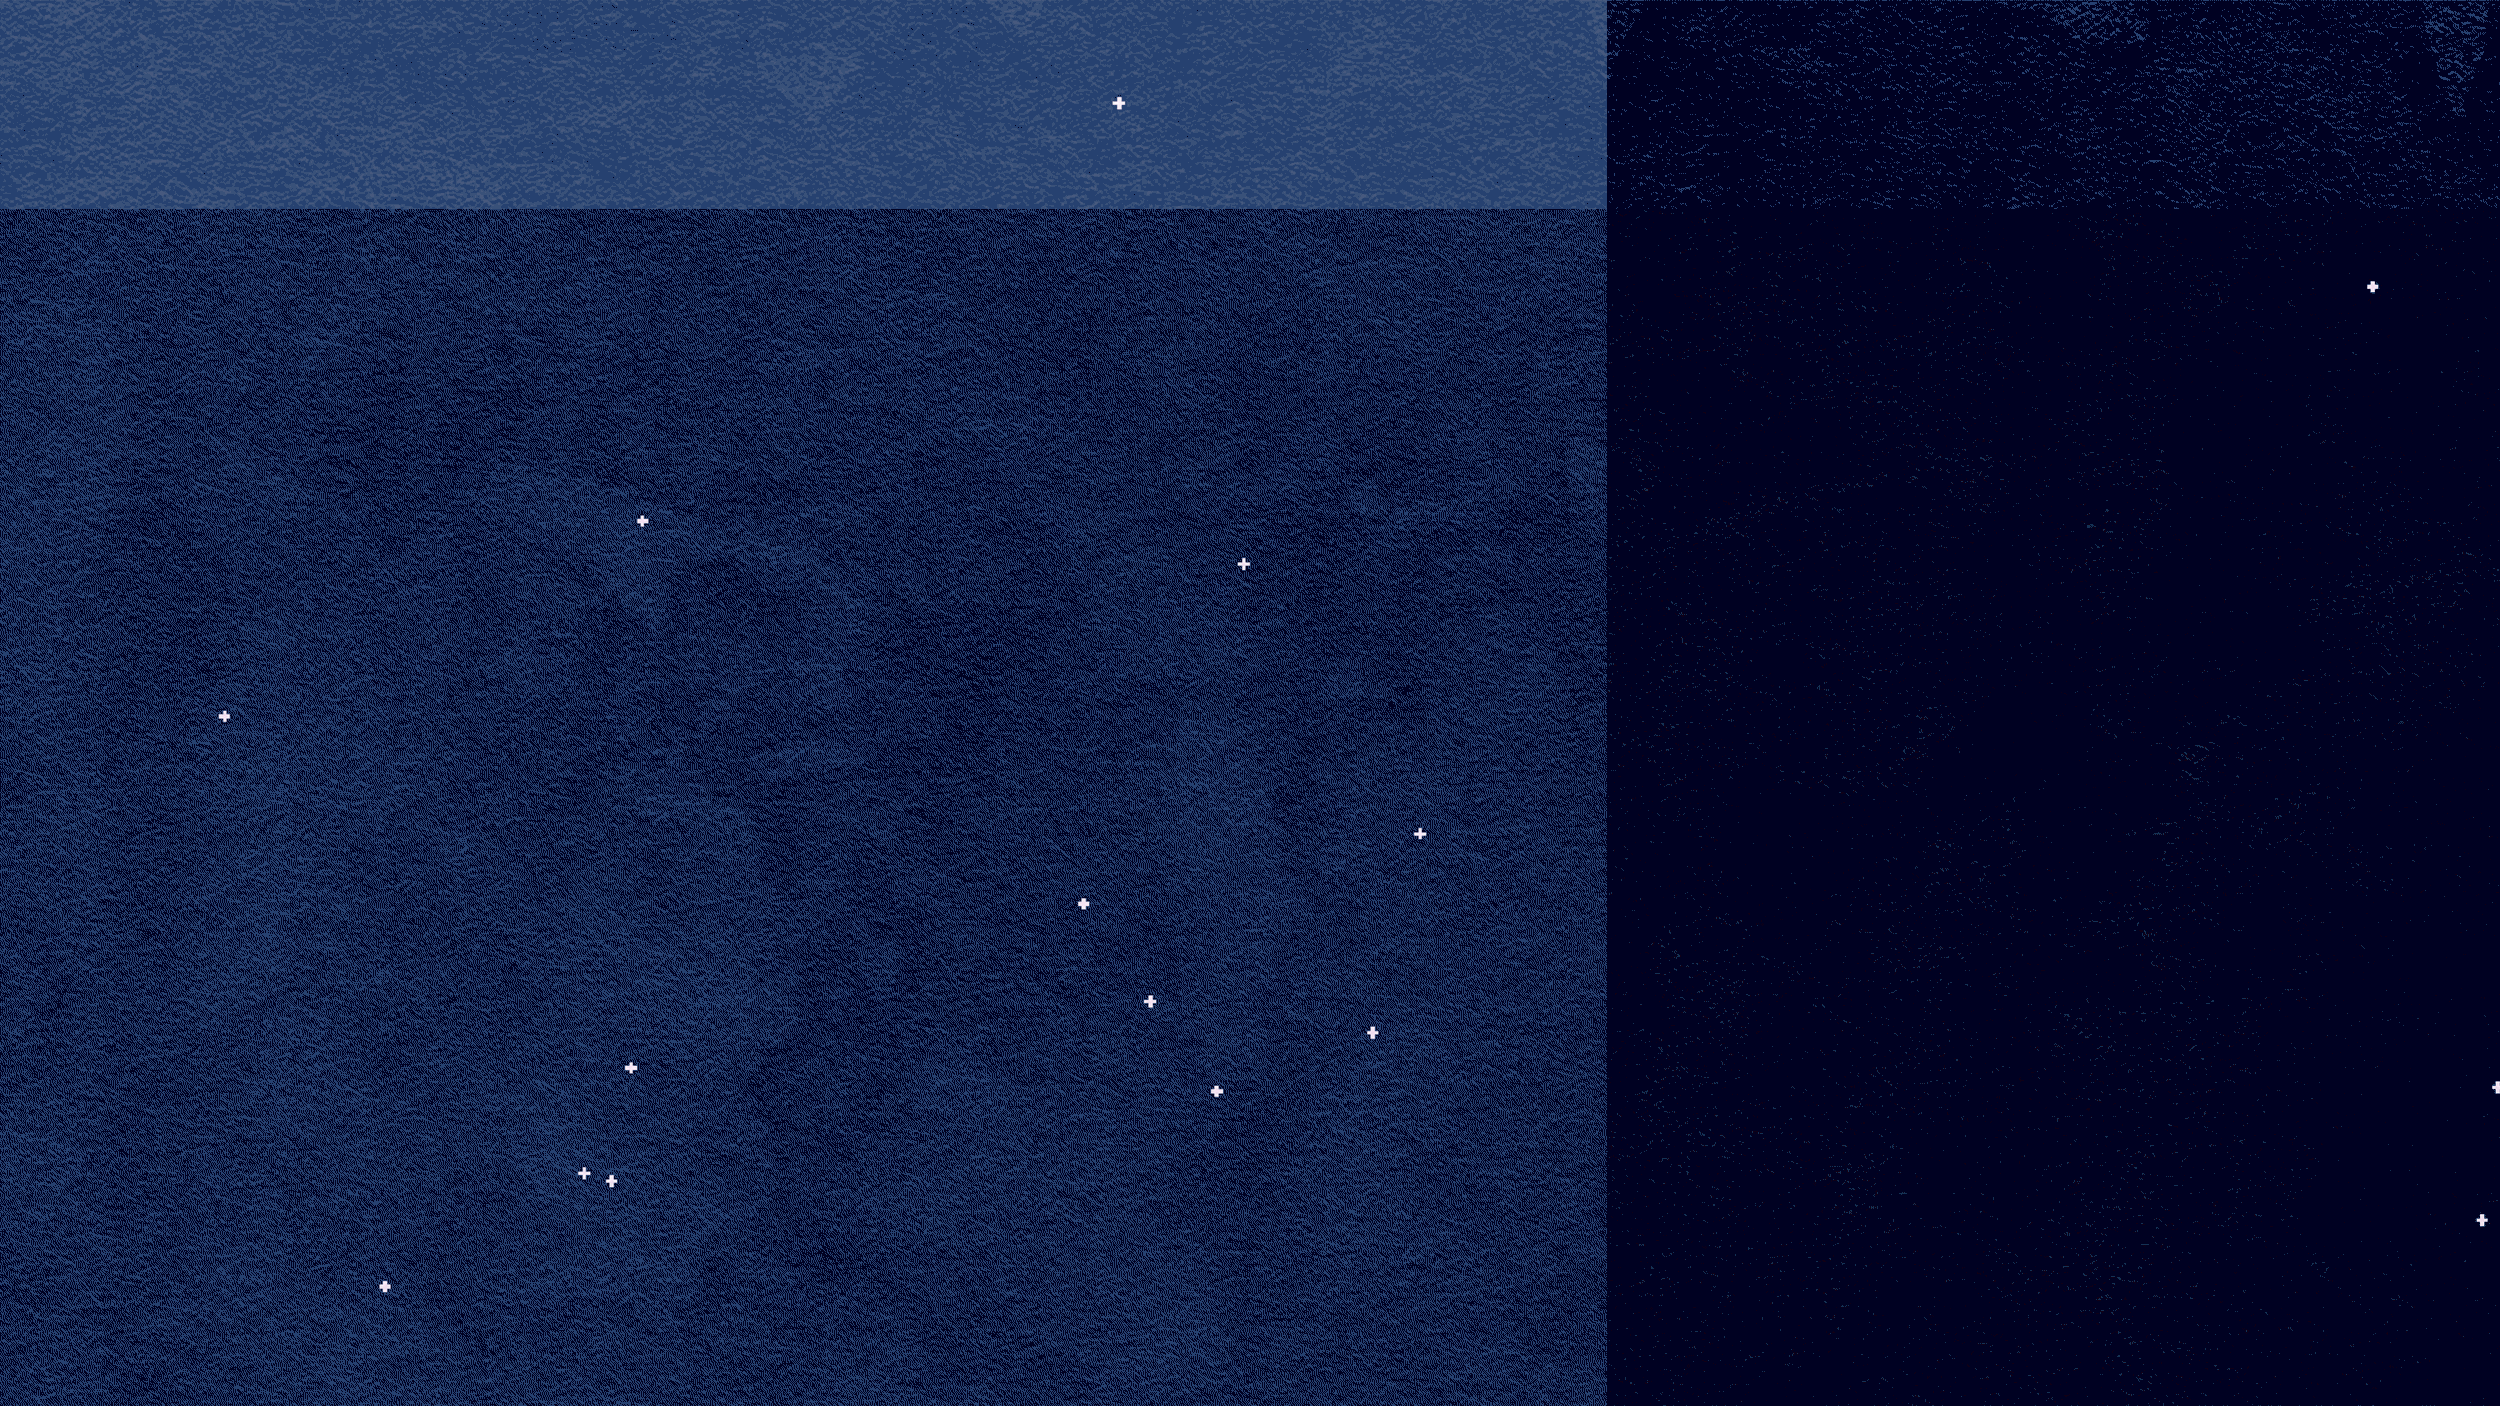 A minimalistic graphic depicting dual shades of blue, segmented horizontally, with small white dots scattered throughout, resembling a starry night sky.